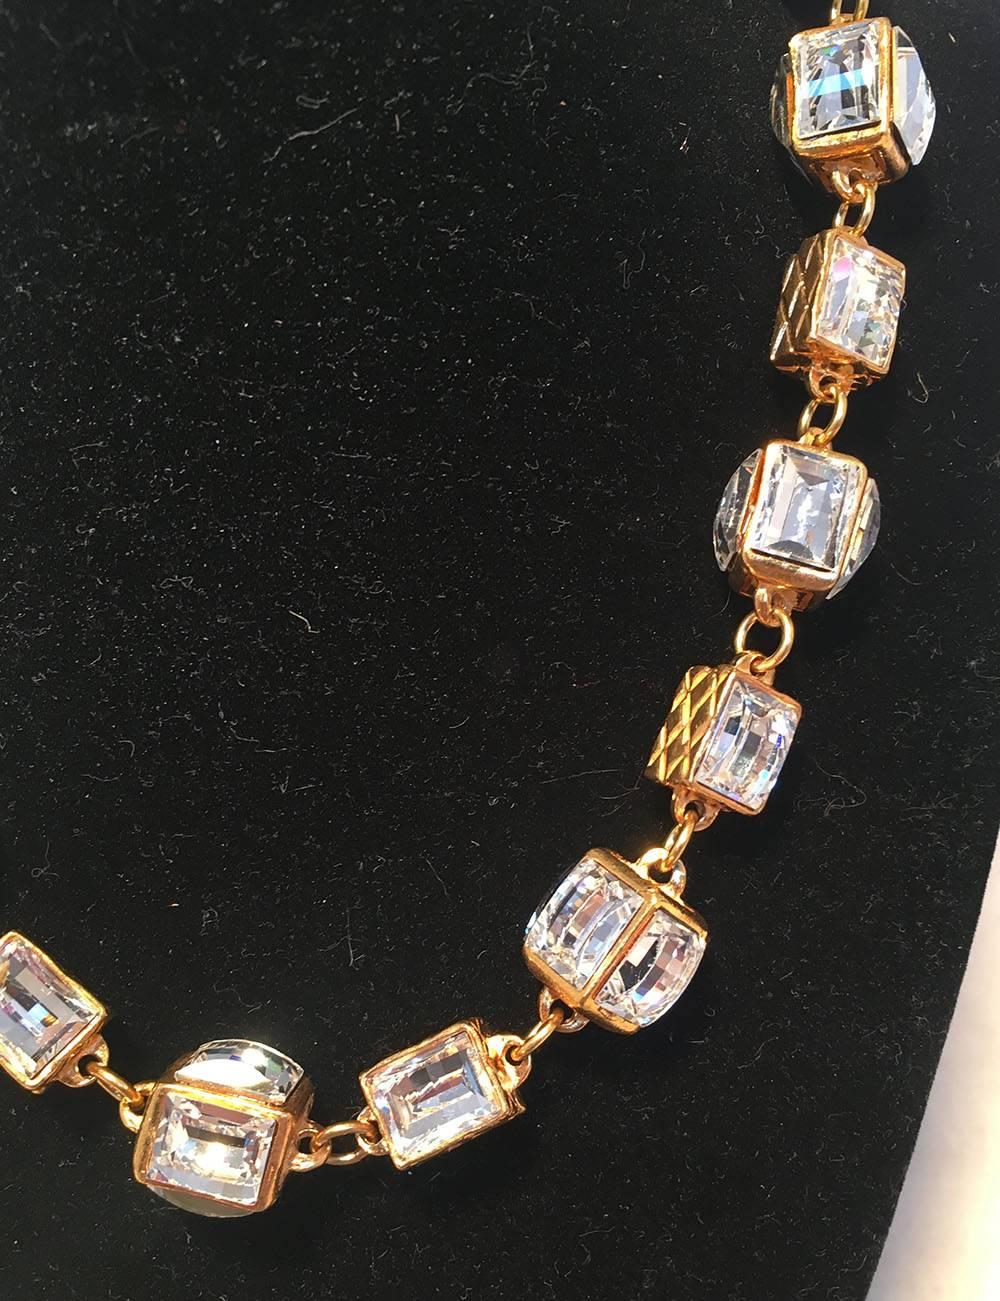 STUNNING Chanel gold crystal square beaded choker in excellent condition. Square beads featuring clear crystals on various sides in 2 different sizes. Smaller size is about 3/8